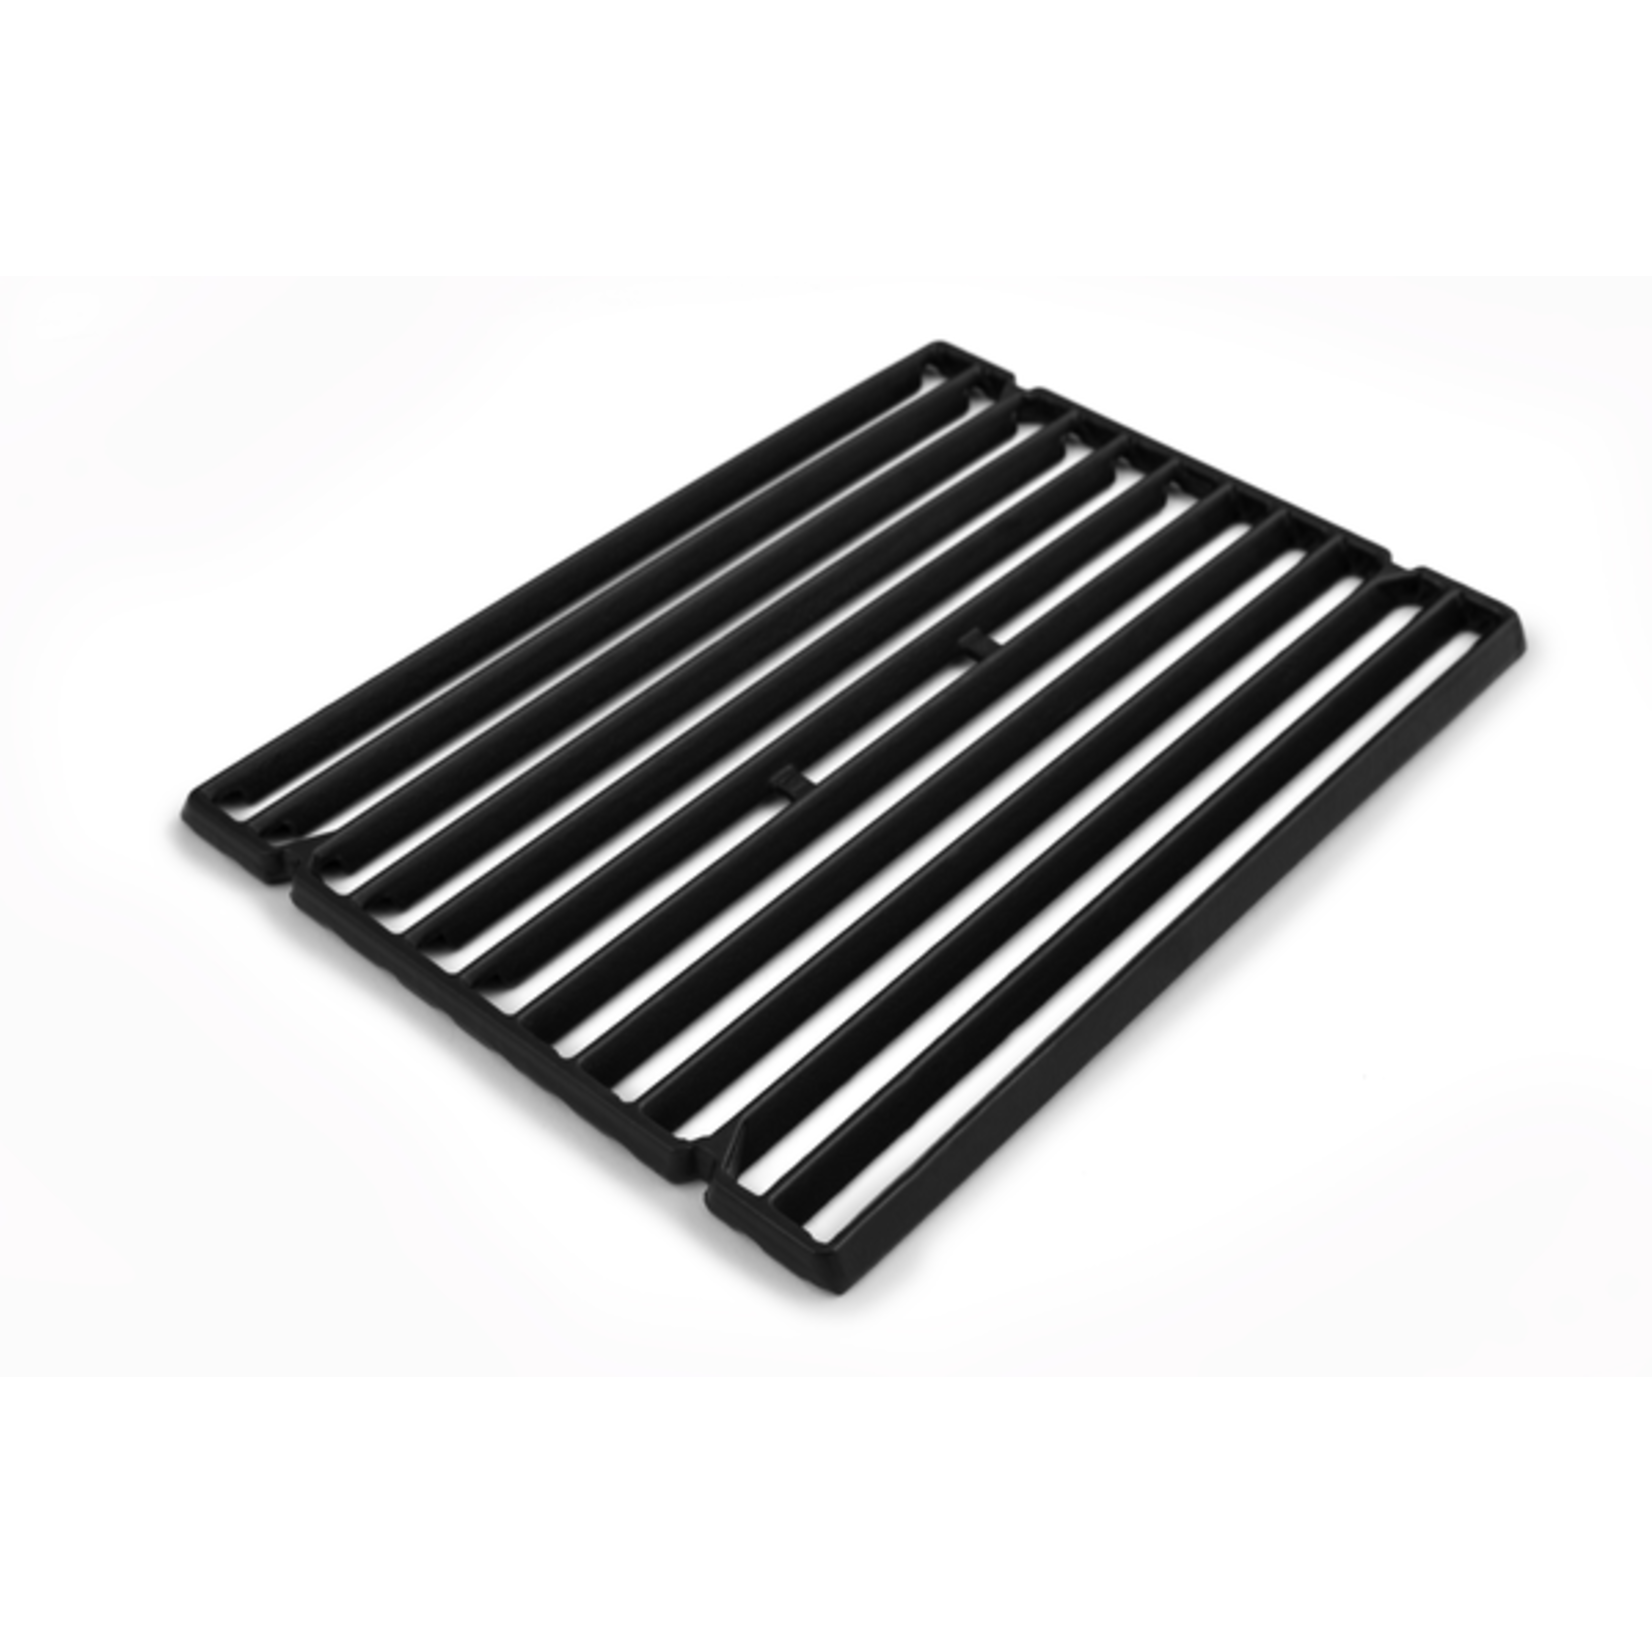 Broil King Cooking Grid - Monarch 300/Crown (T32) - Cast Iron - 2 Pieces